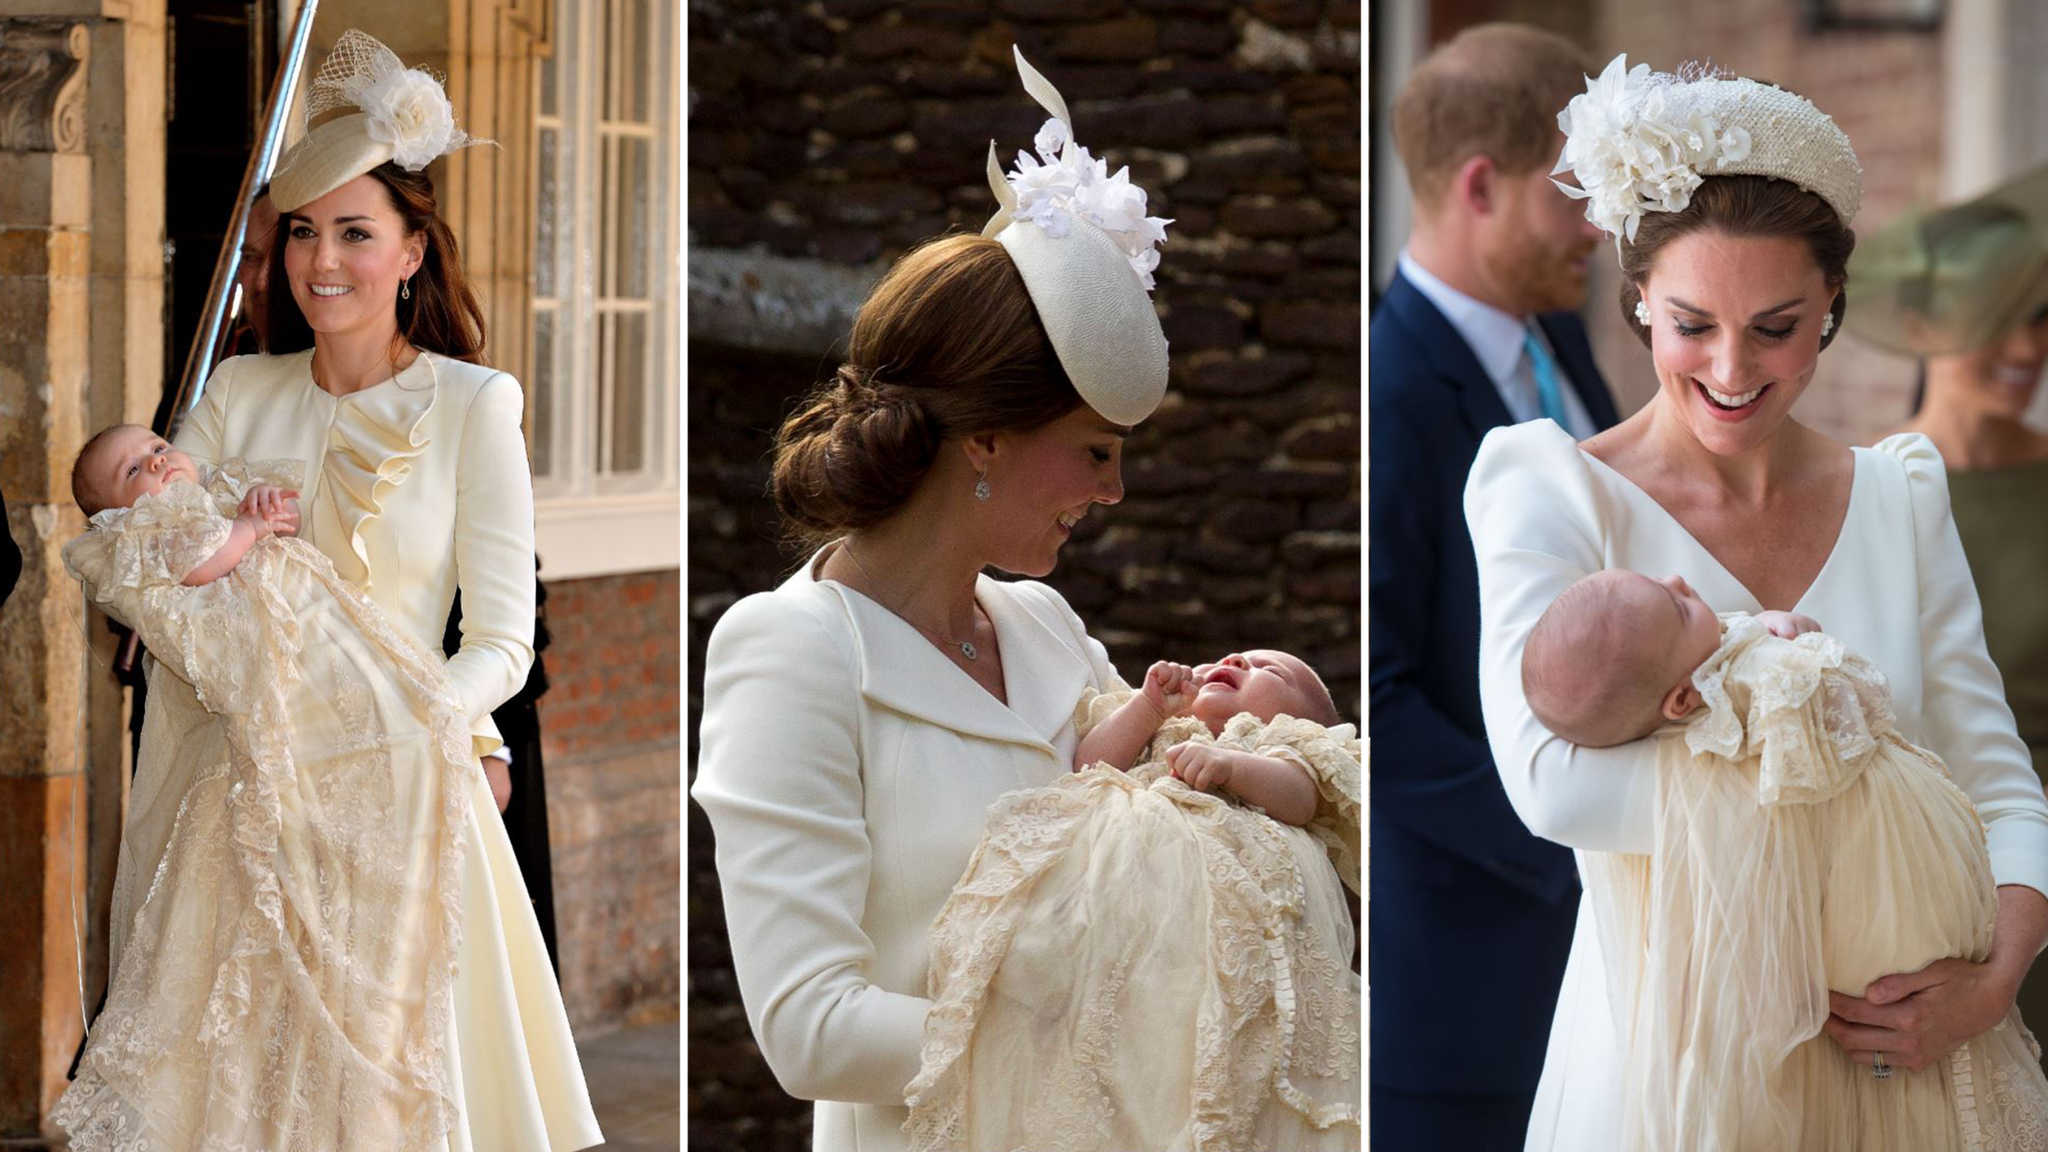 Baby Archie's Christening Included This Very Royal Family Heirloom